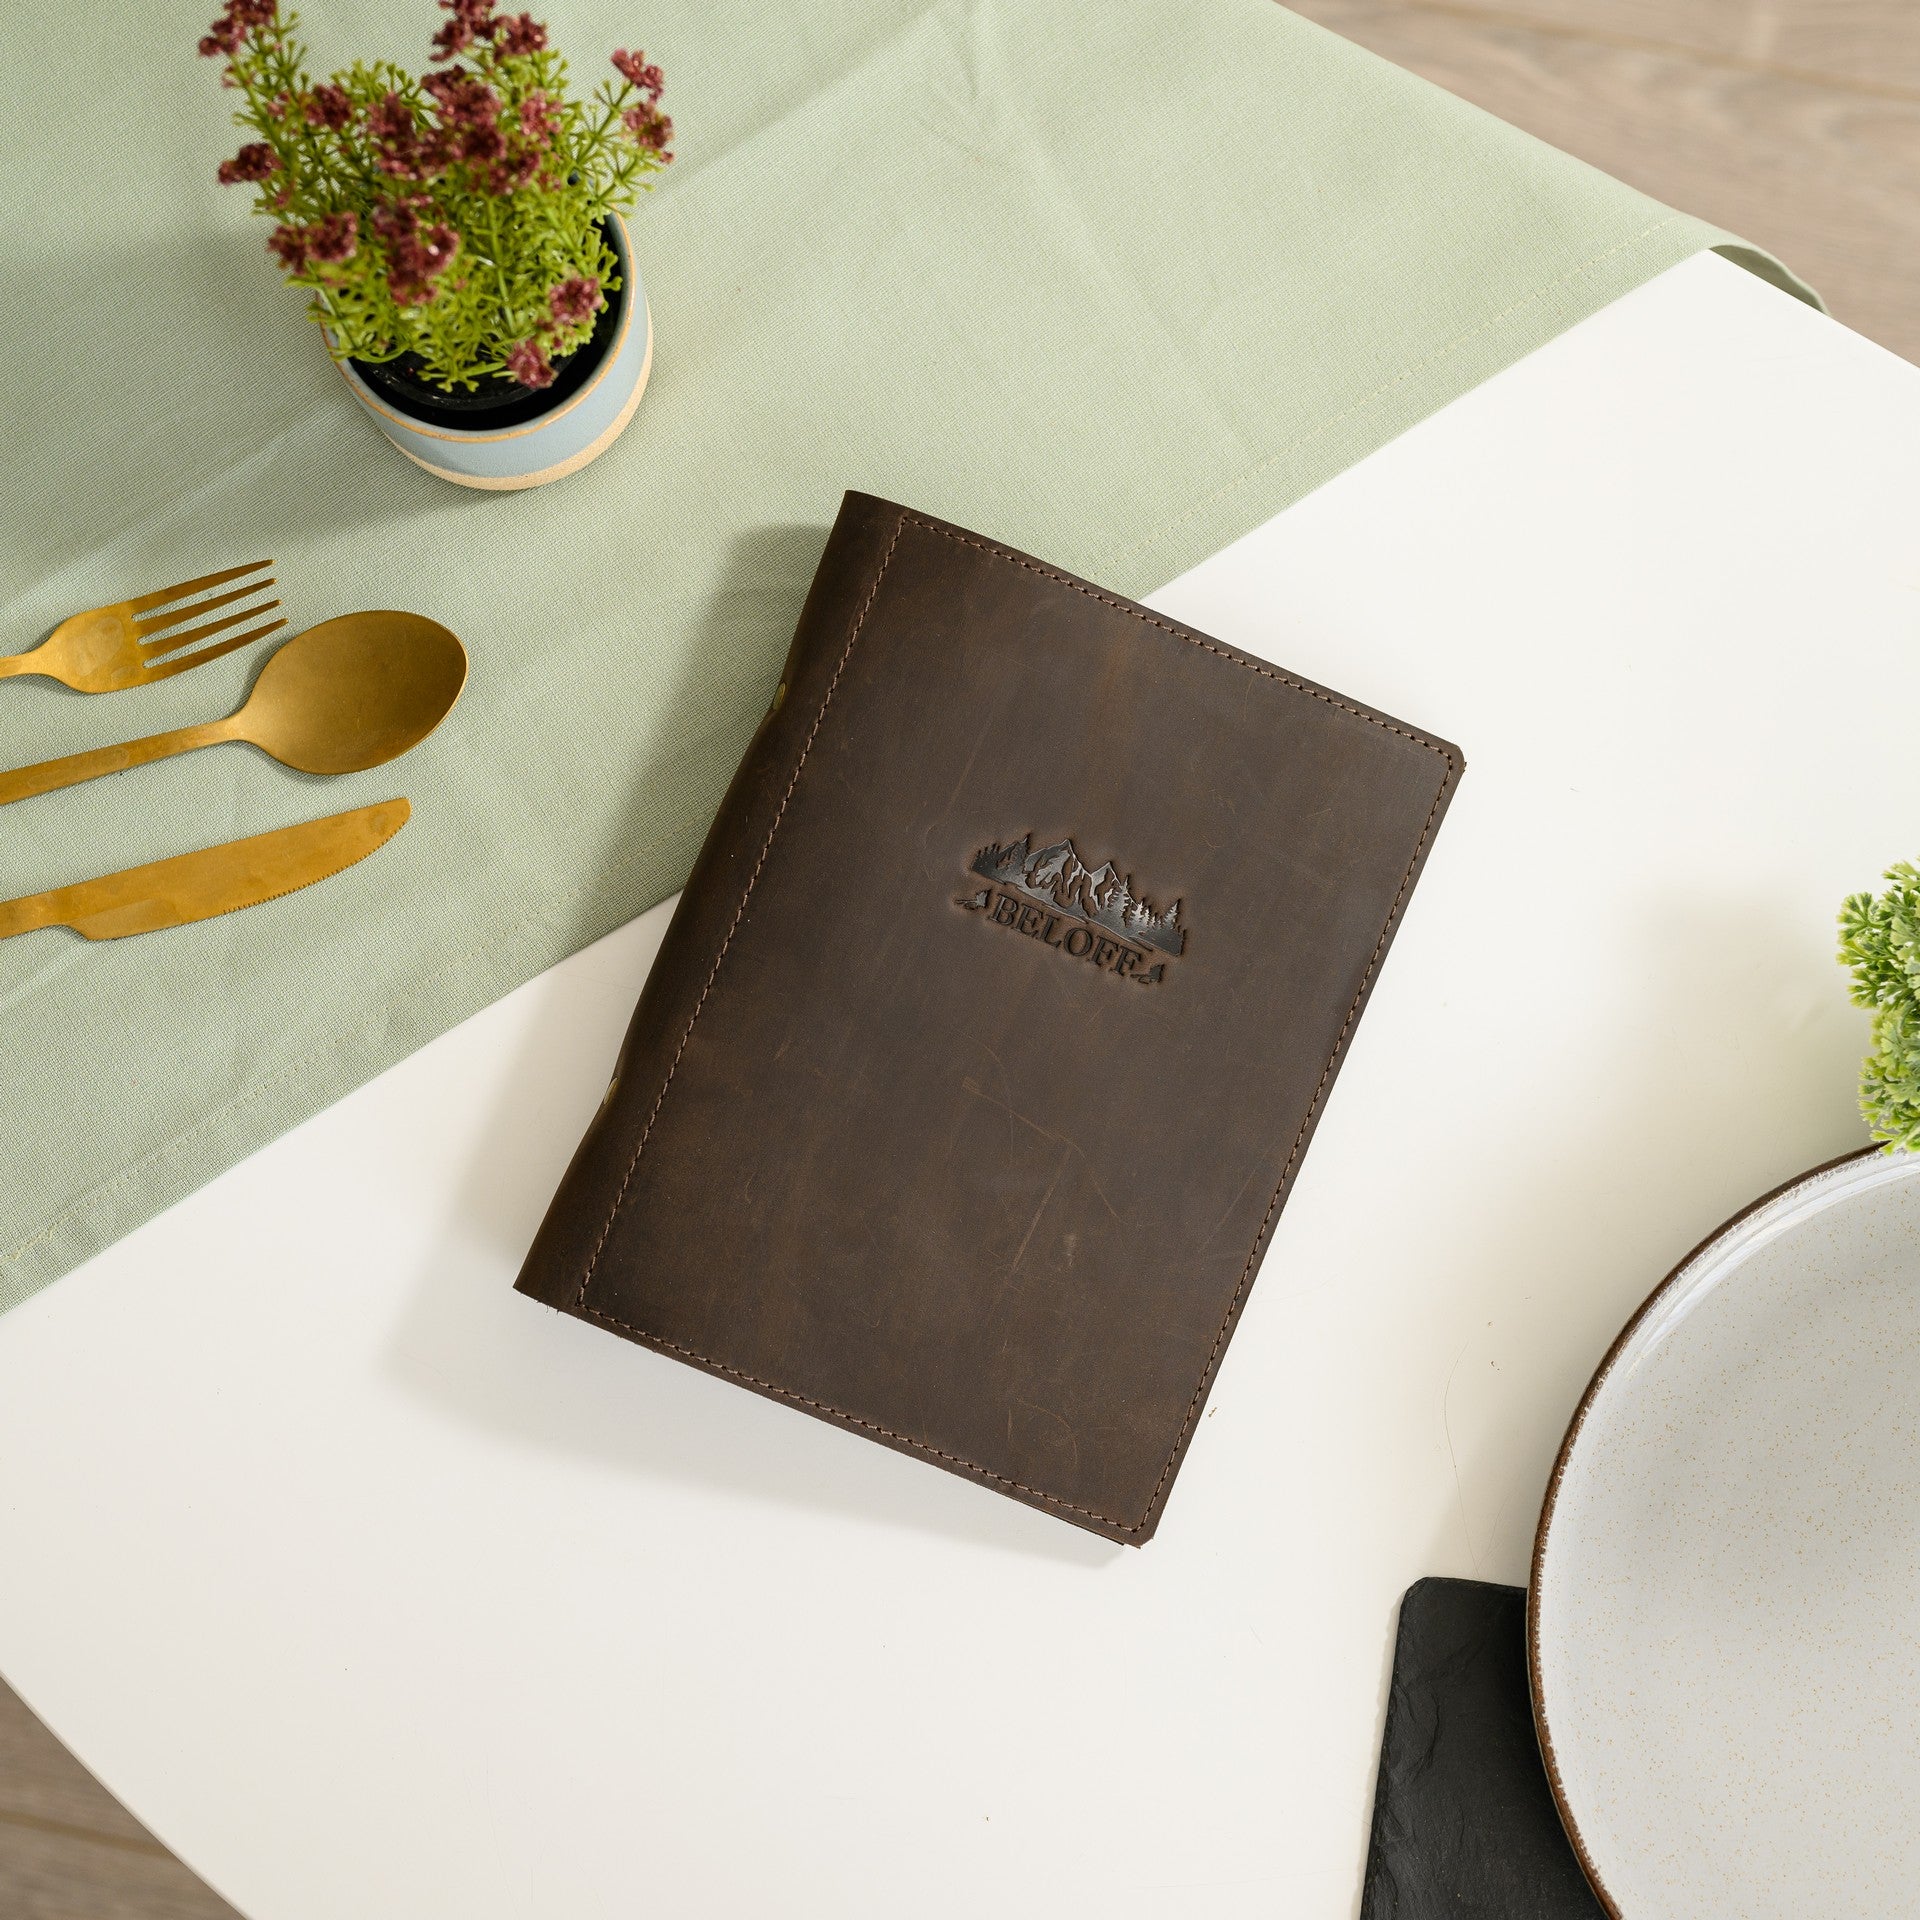 Make your menu stand out with our handcrafted design, featuring logo embossing for a truly unique presentation.